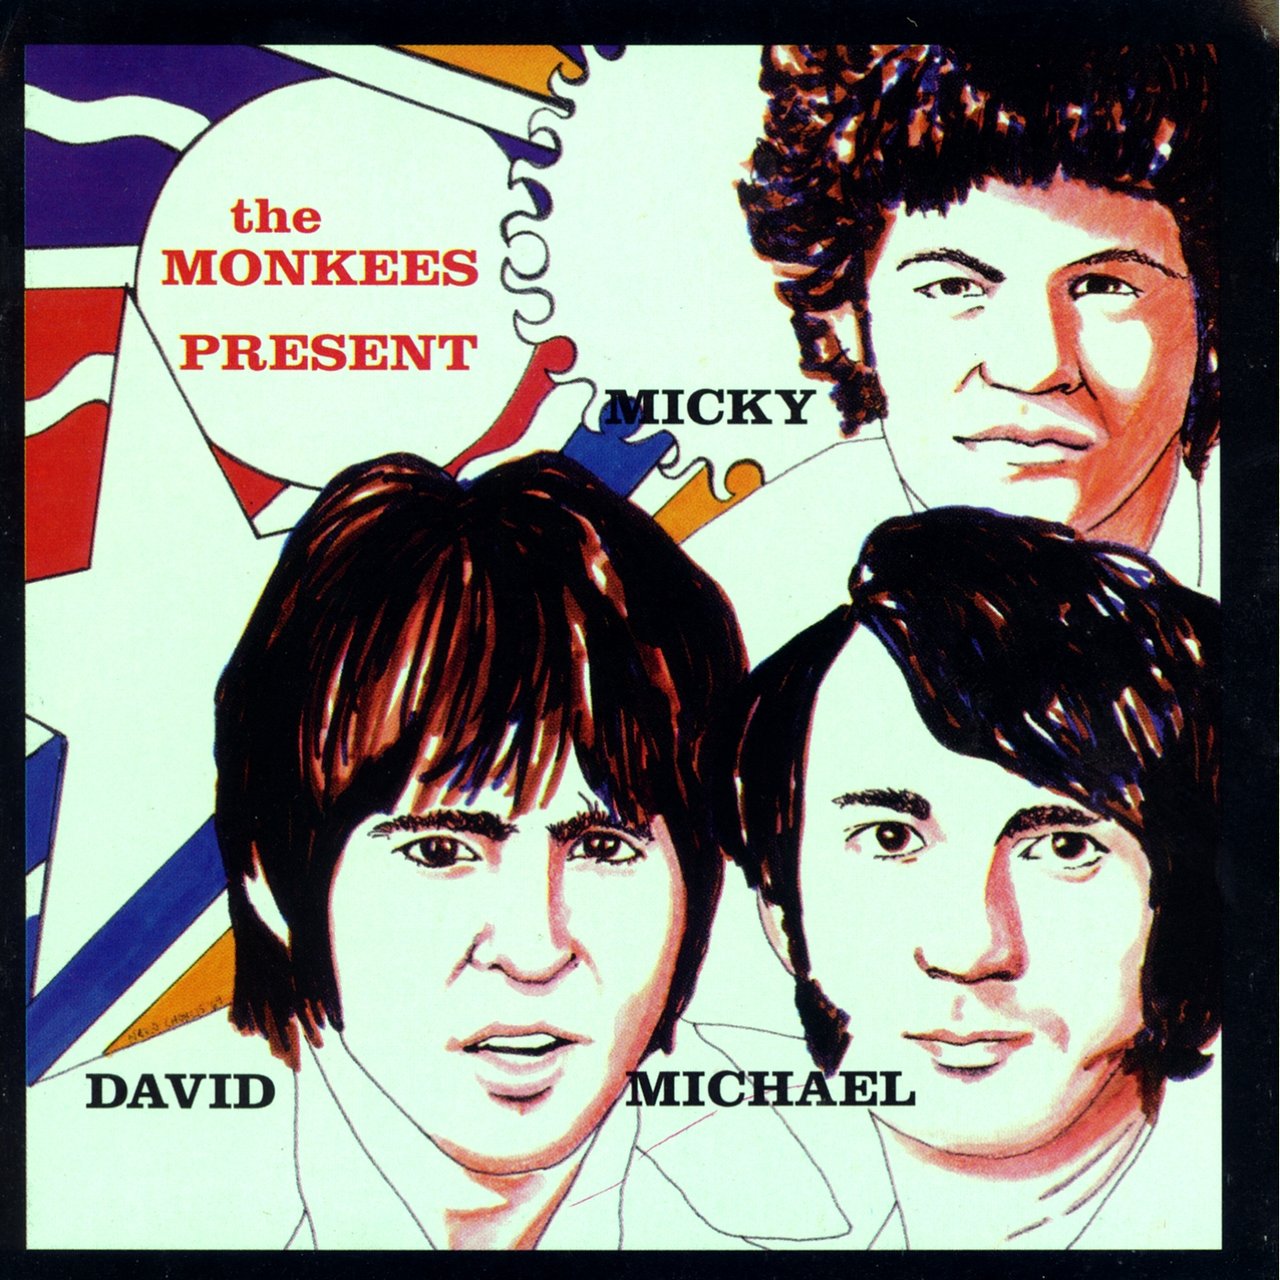 The Monkees - The Monkees Present- Micky, David & Michael [1969]